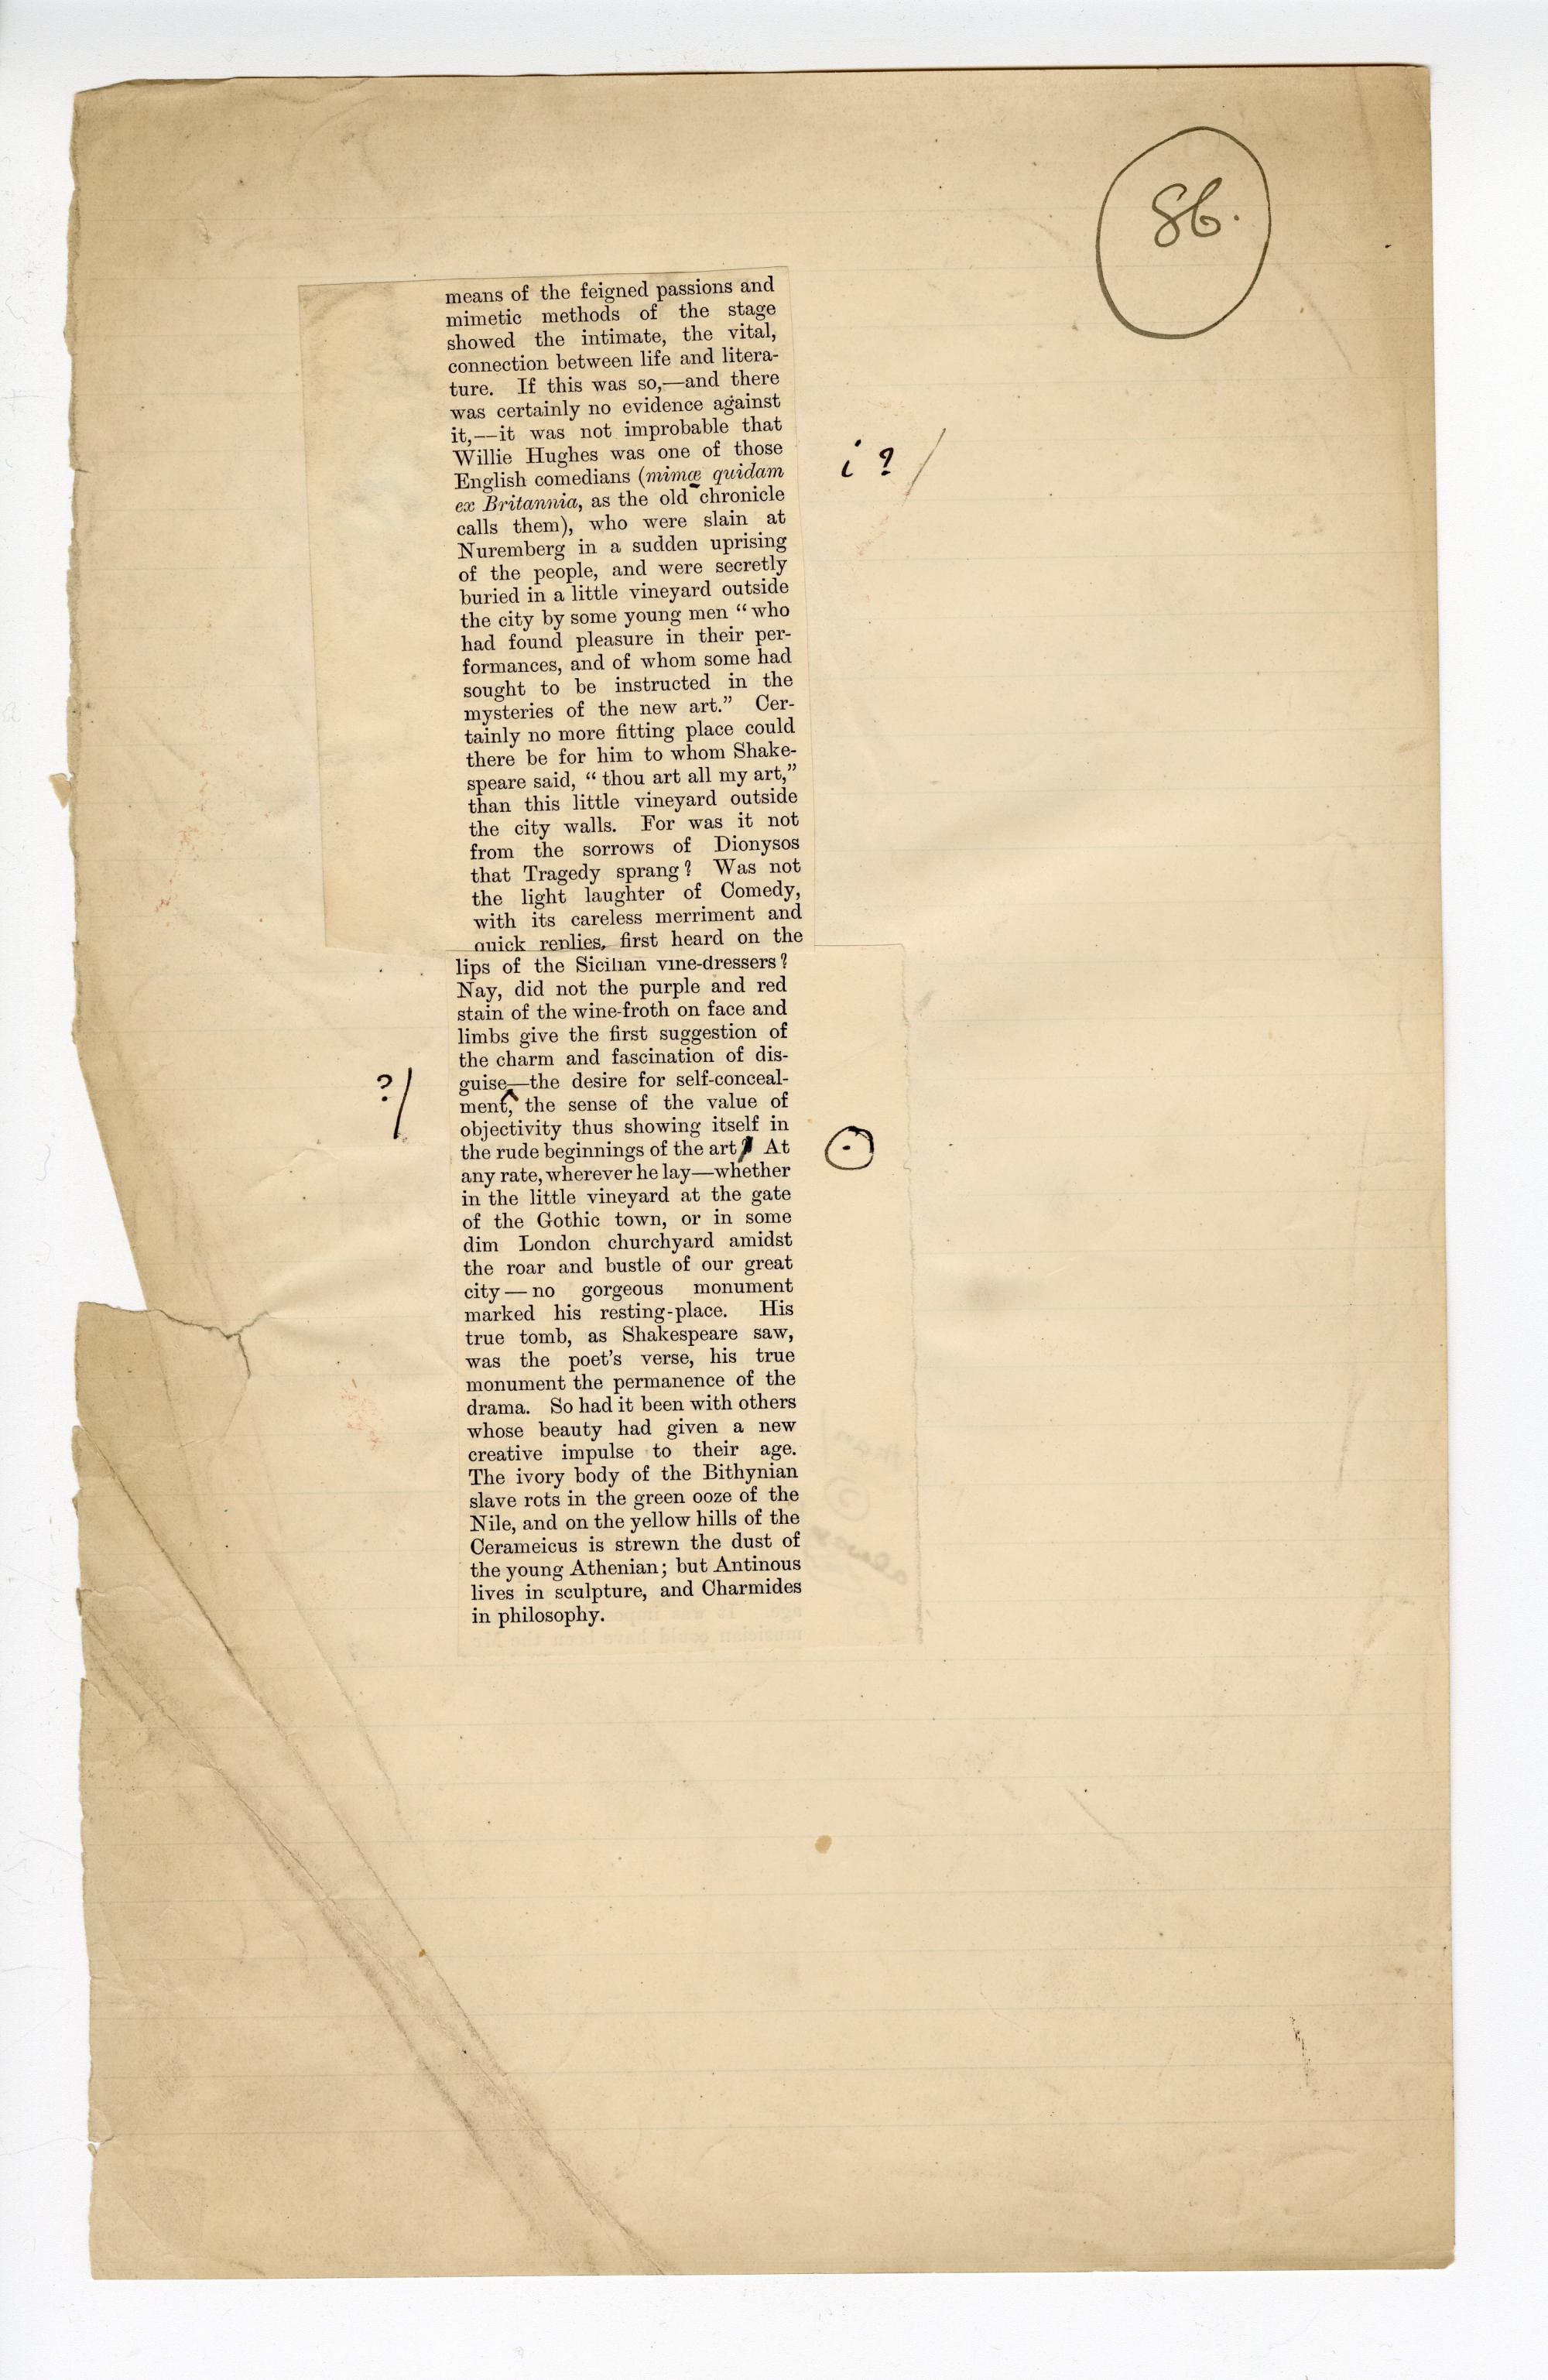 Folio 86 contains two cutouts from the upper portion of p. 18 of the Blackwood's 1889 printing glued down into a single column onto a notebook page. Wilde makes annotations on the Blackwood's cutouts and on the notebook page.